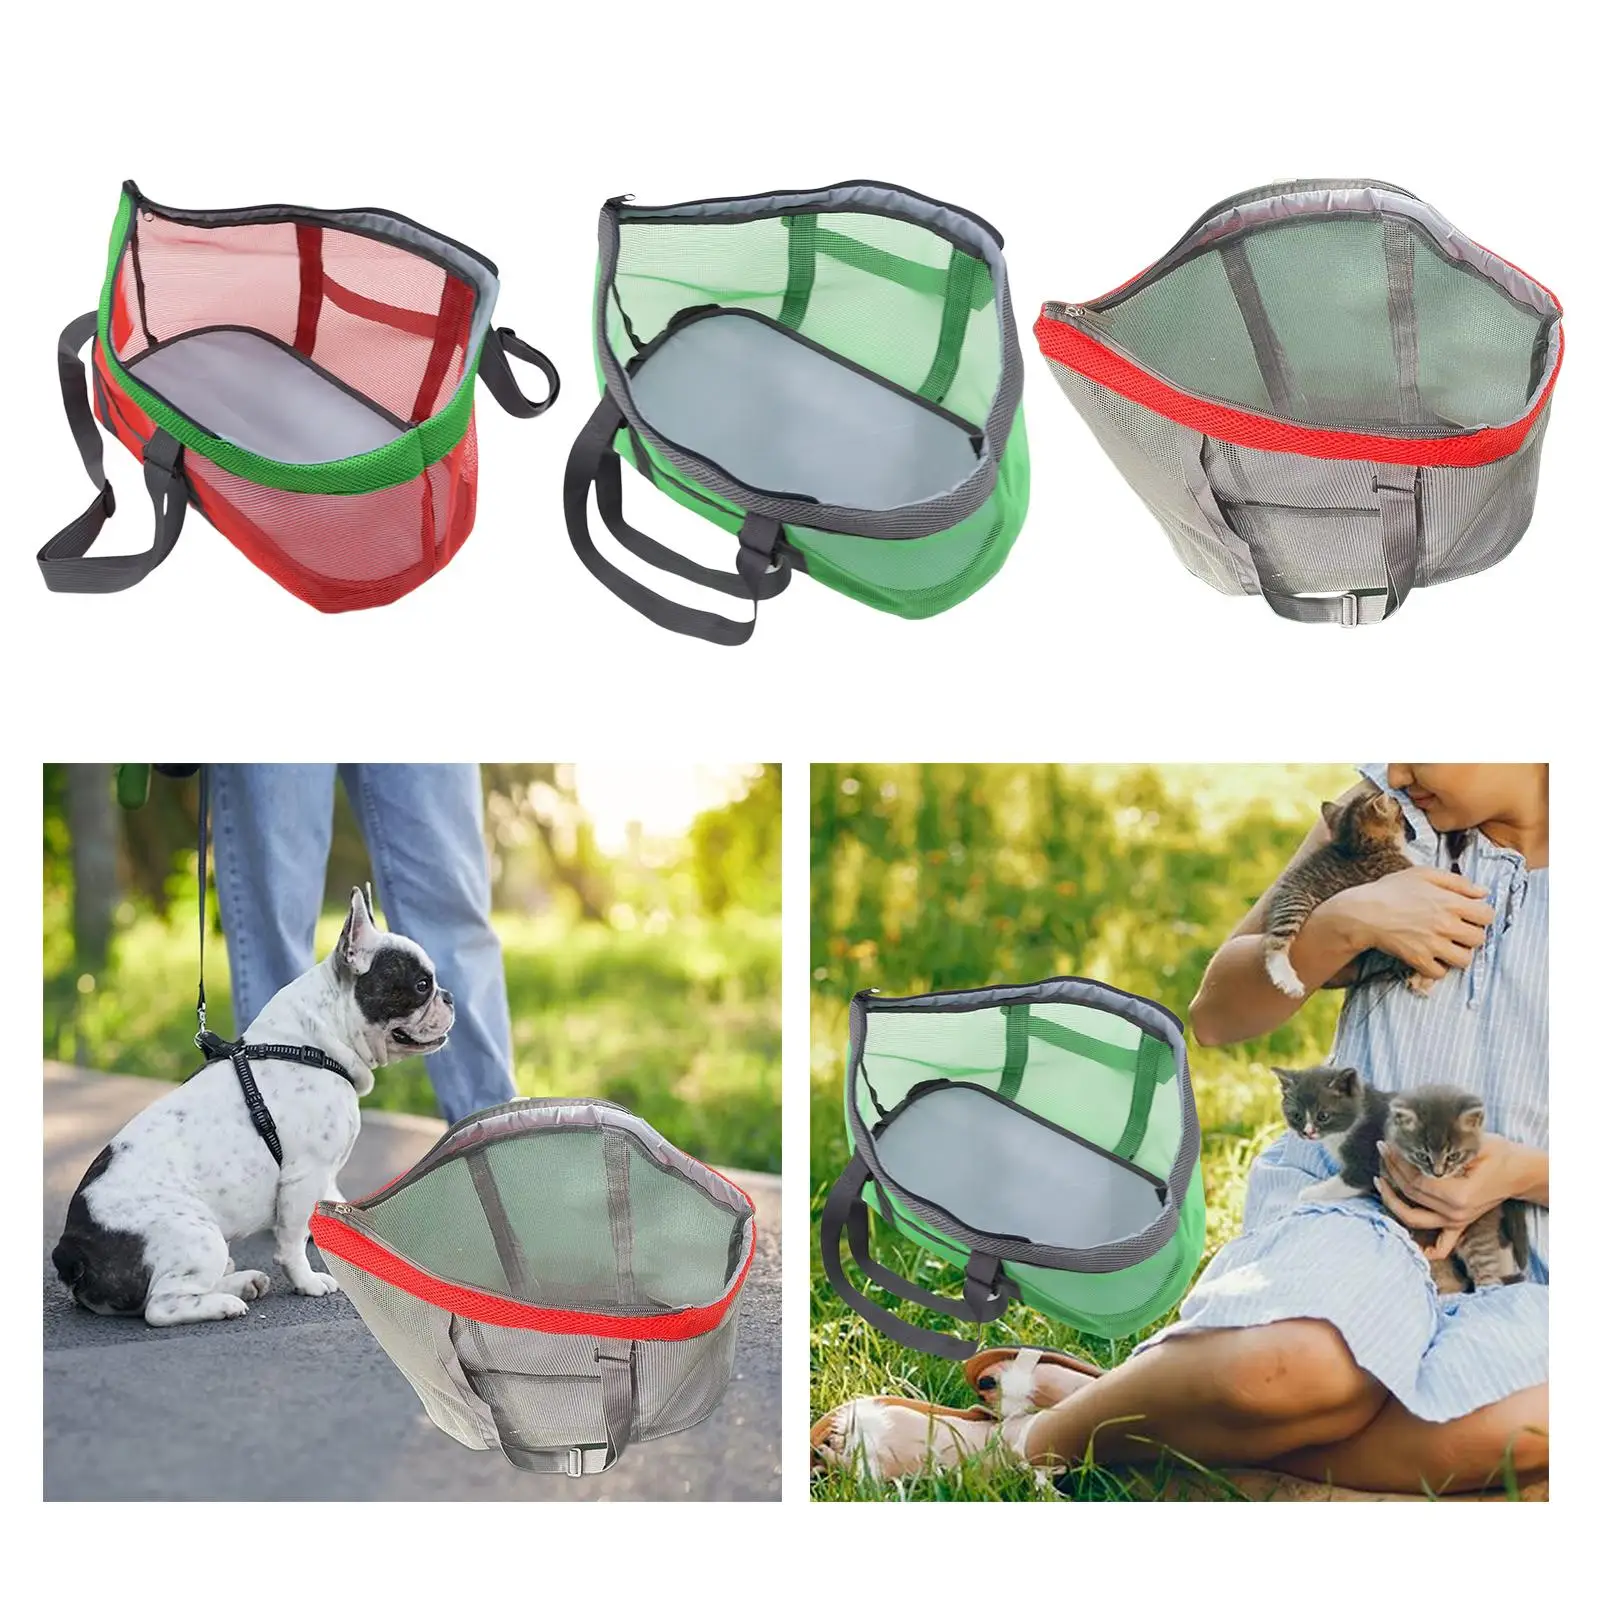 Foldable Soft Sided Pet Travel Carrier Bag Lightweight Panoramic Pet Bag Breathable for Small Medium Dog Outdoor Travel